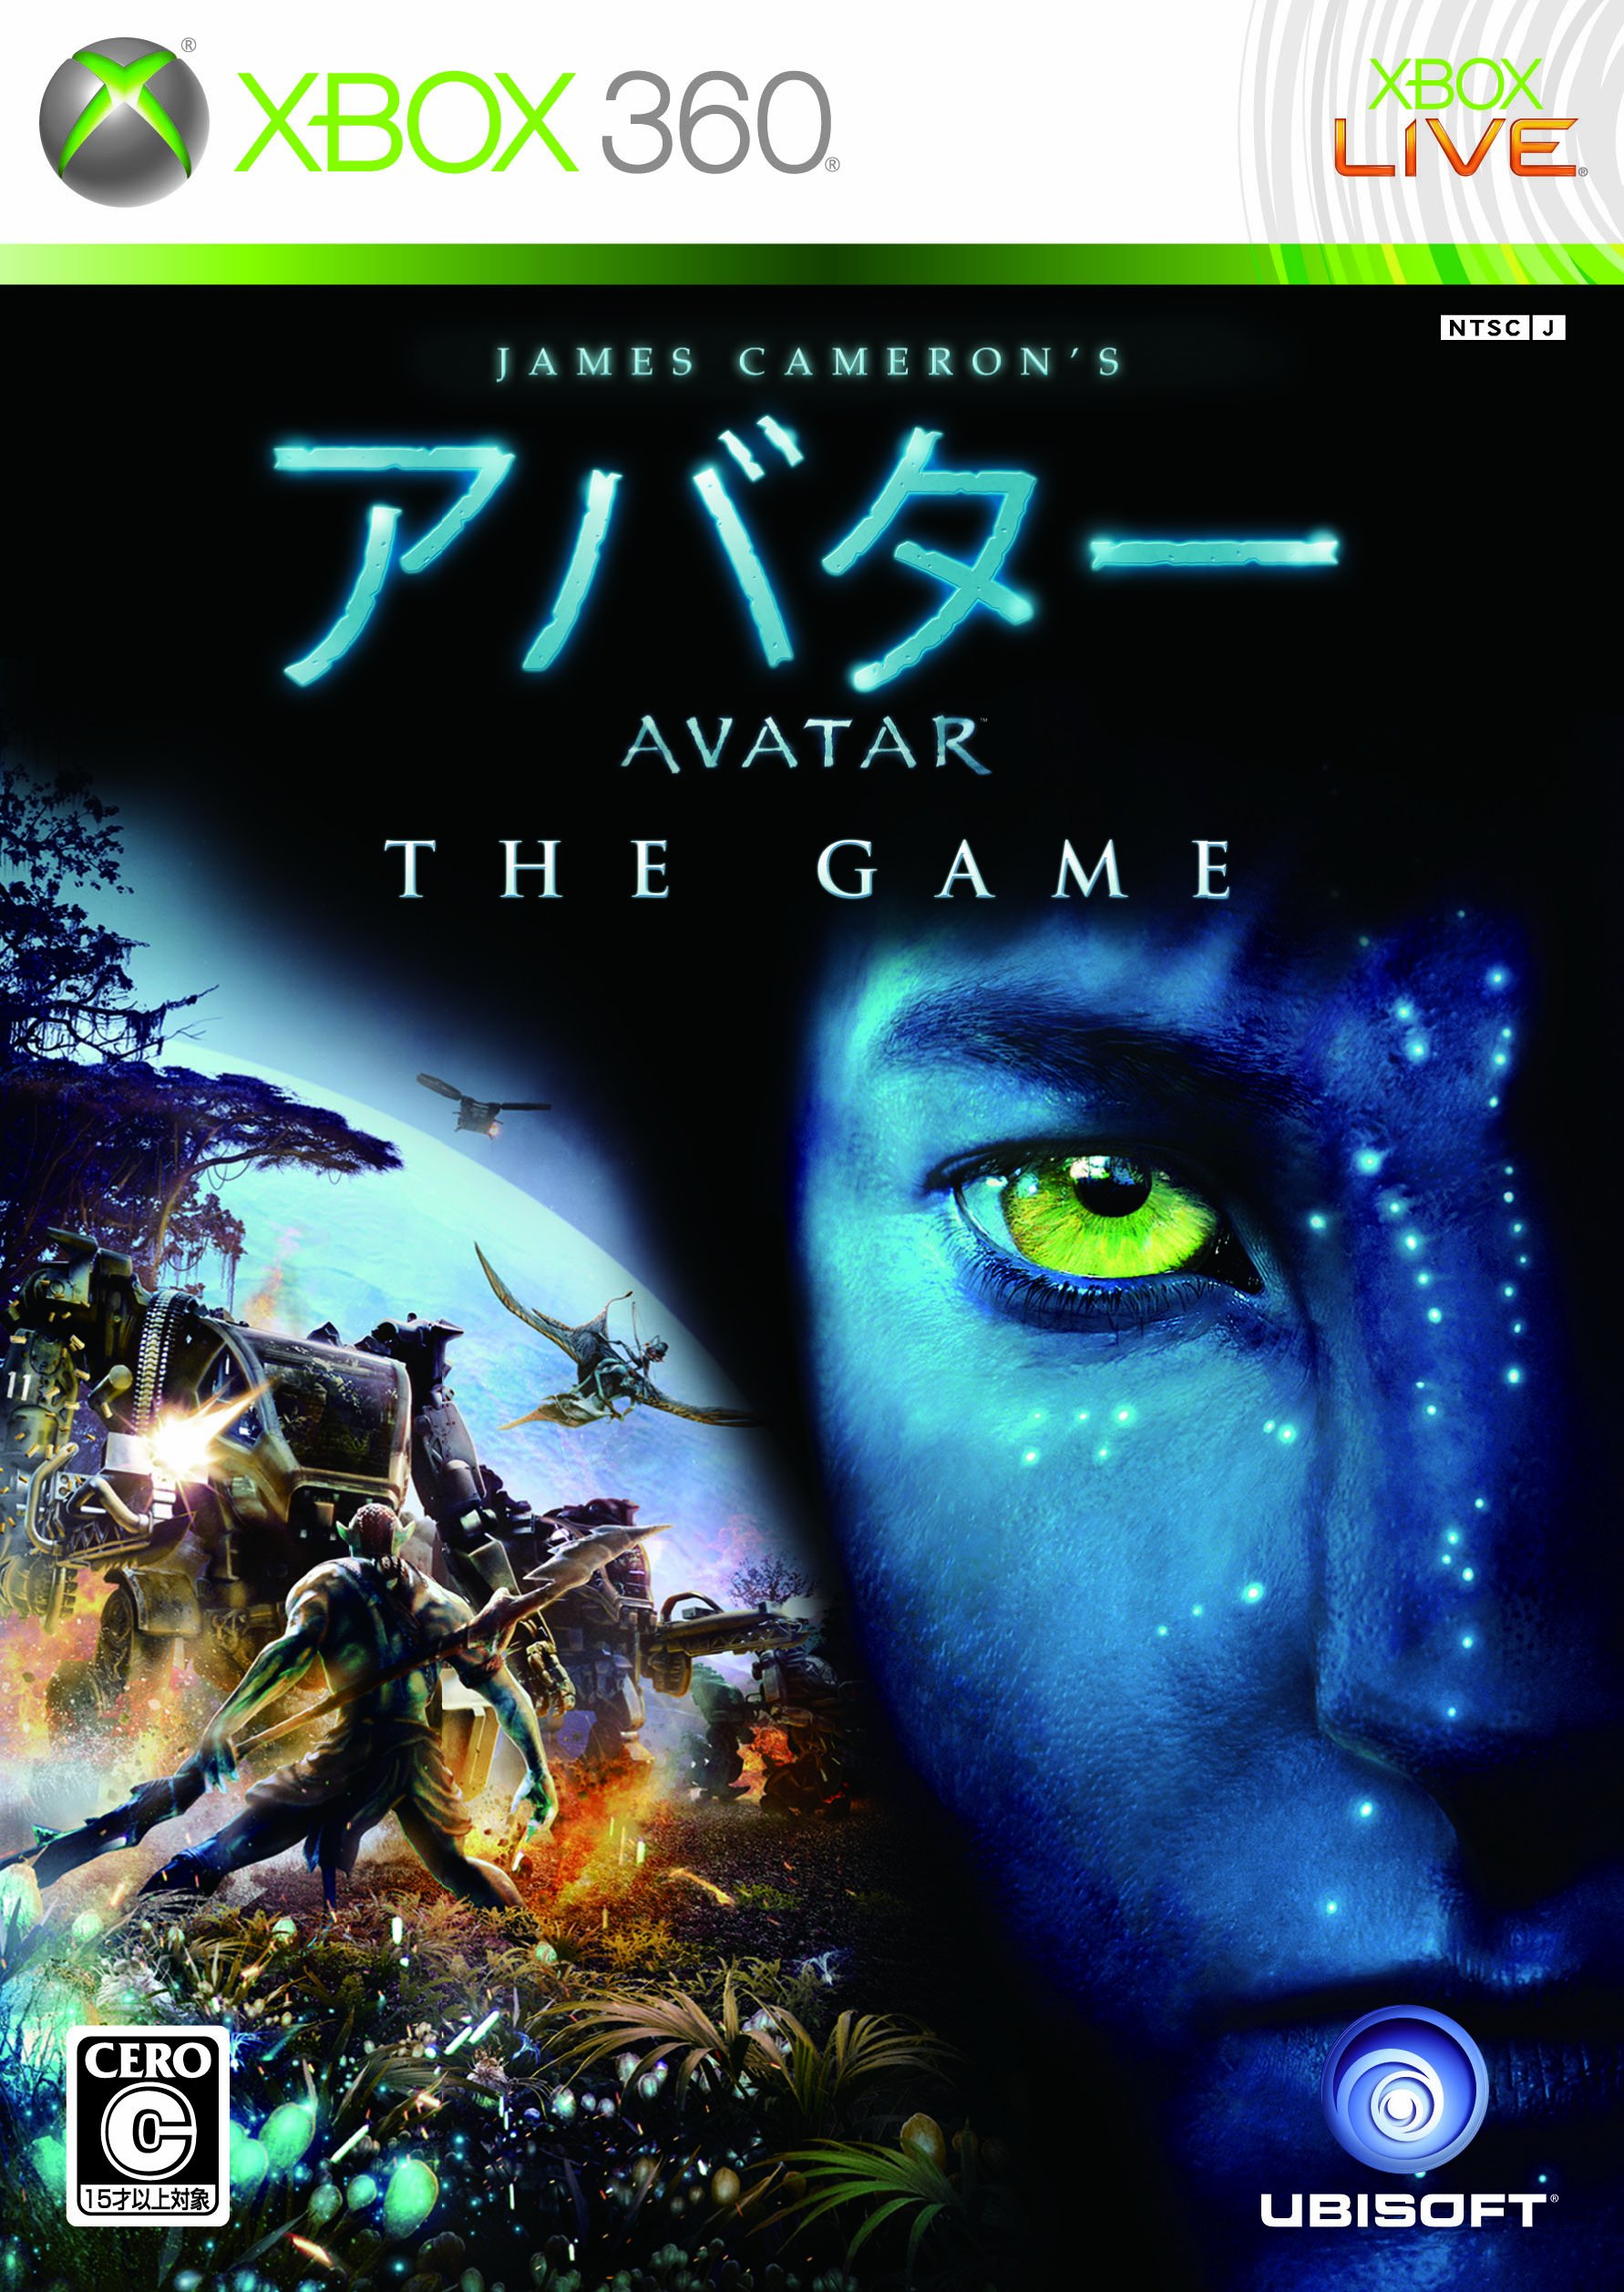 【Xbox360】 アバター THE GAME